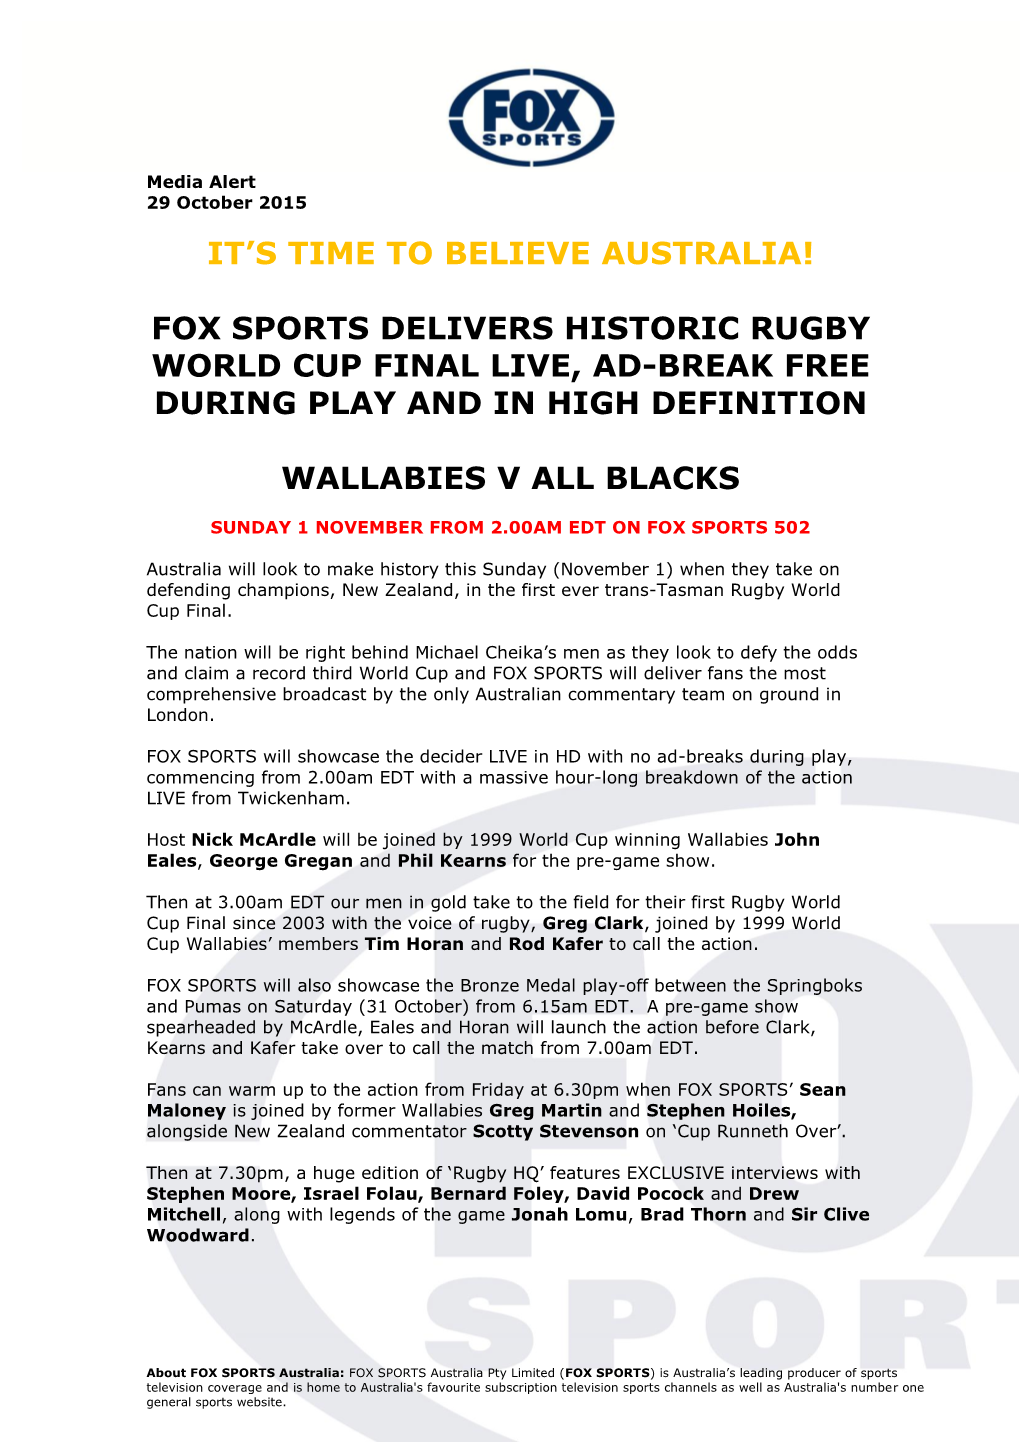 Fox Sports Delivers Historic Rugby World Cup Final Live, Ad-Break Free During Play and in High Definition